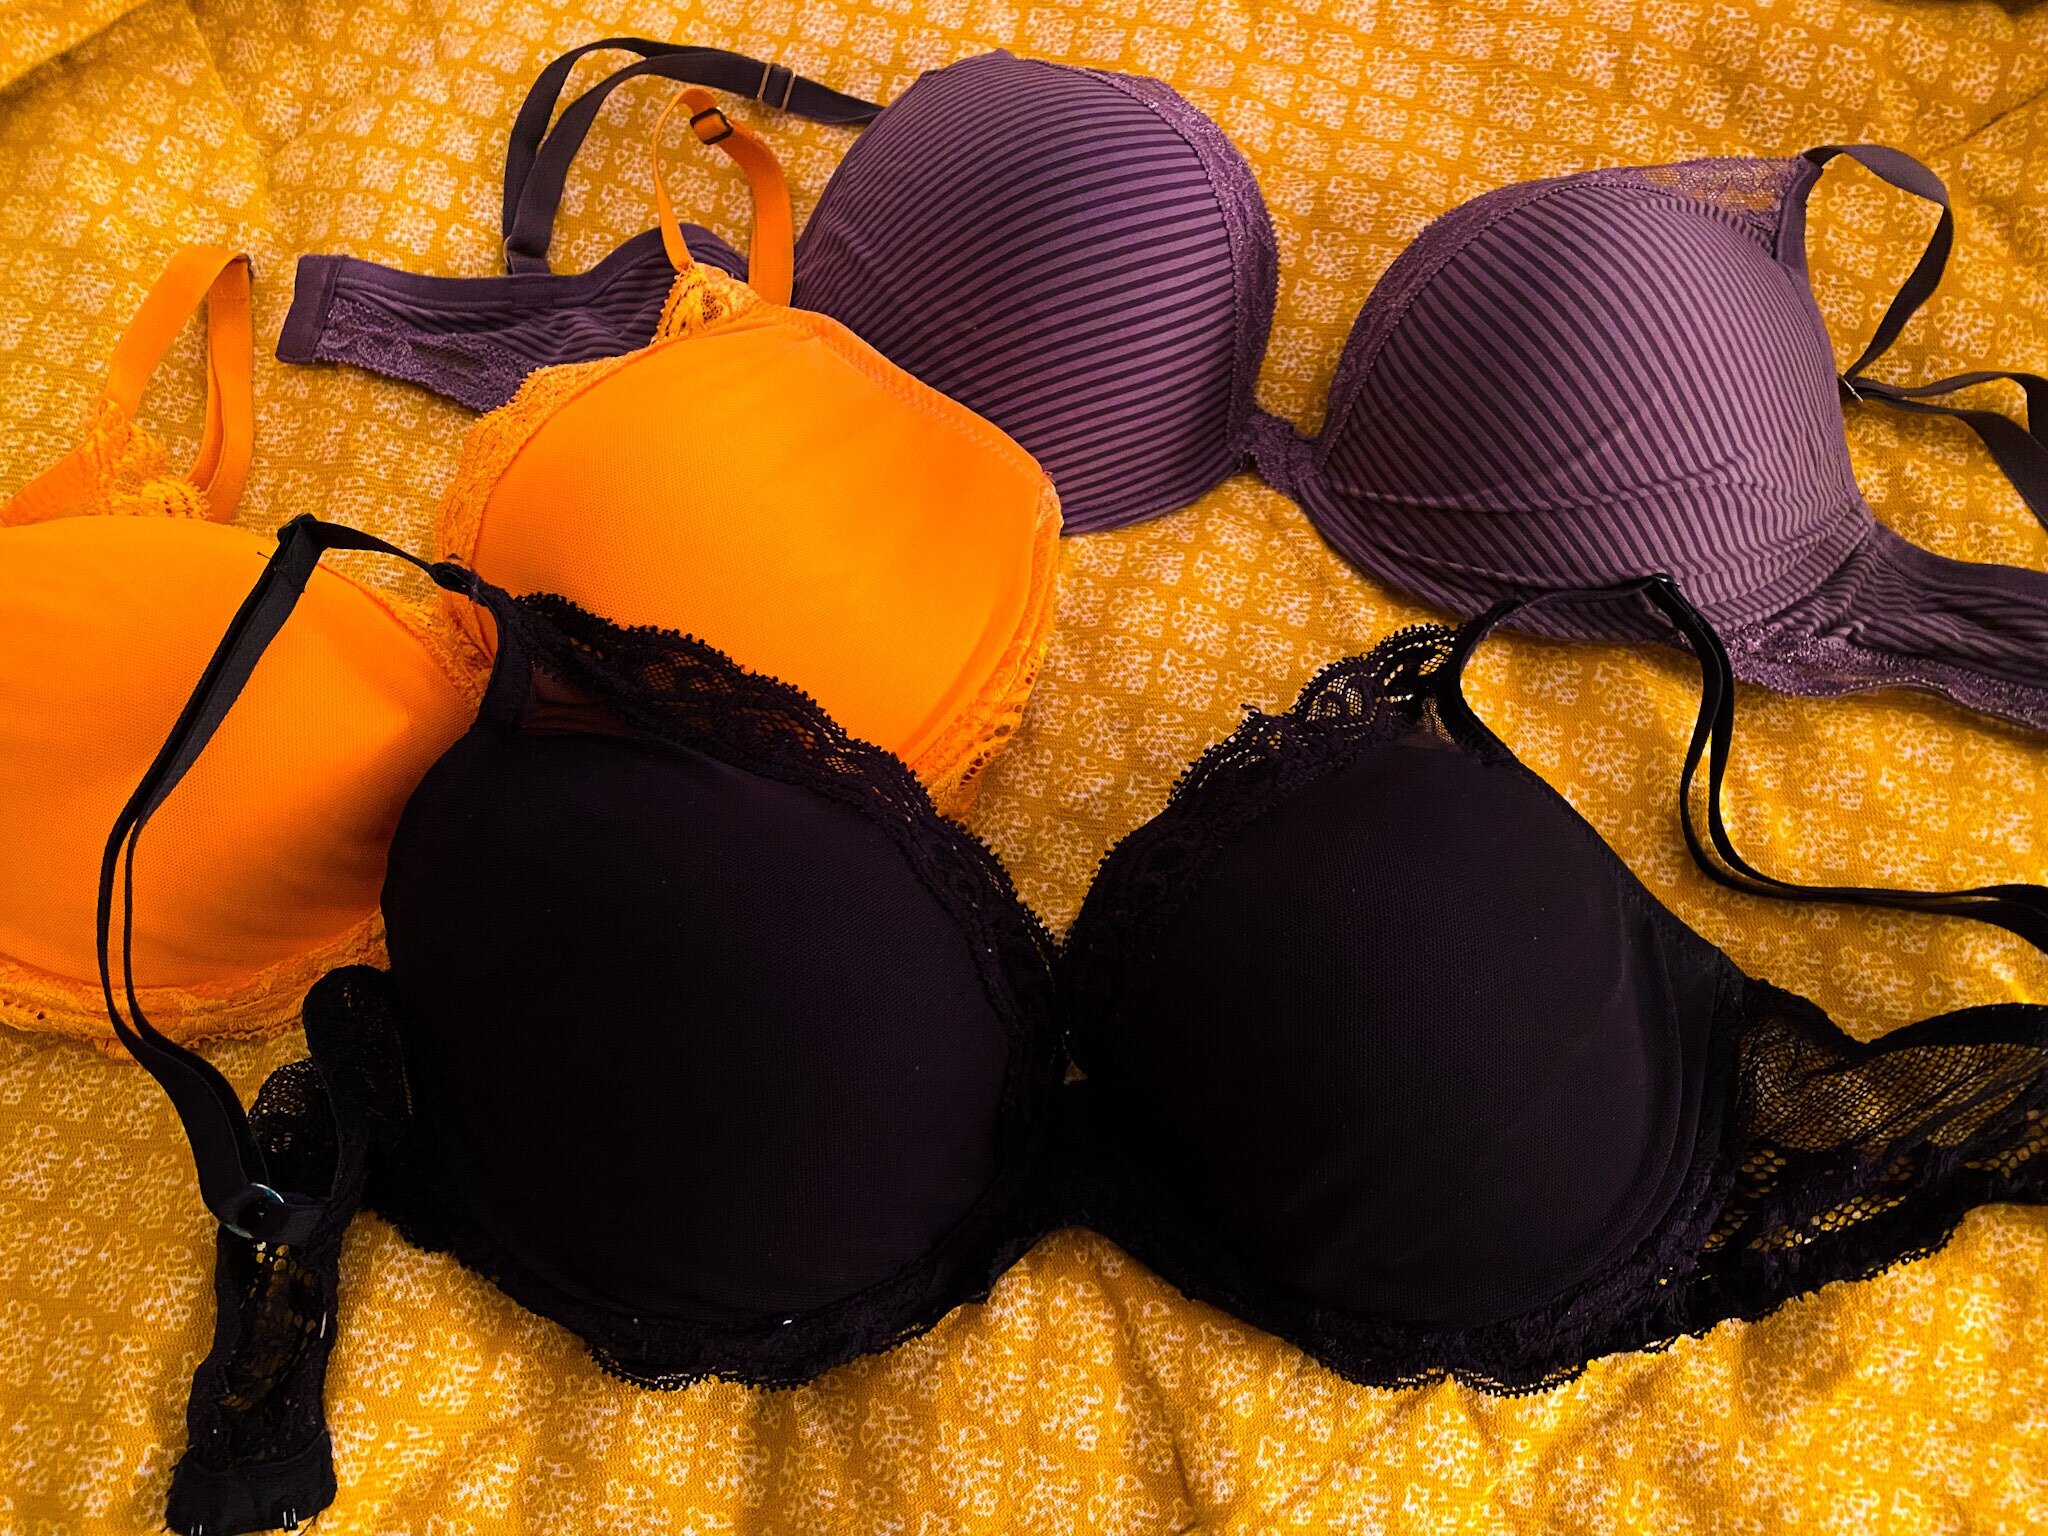 Natori Feathers: The Prettiest Bra You've Seen a Thousand Times